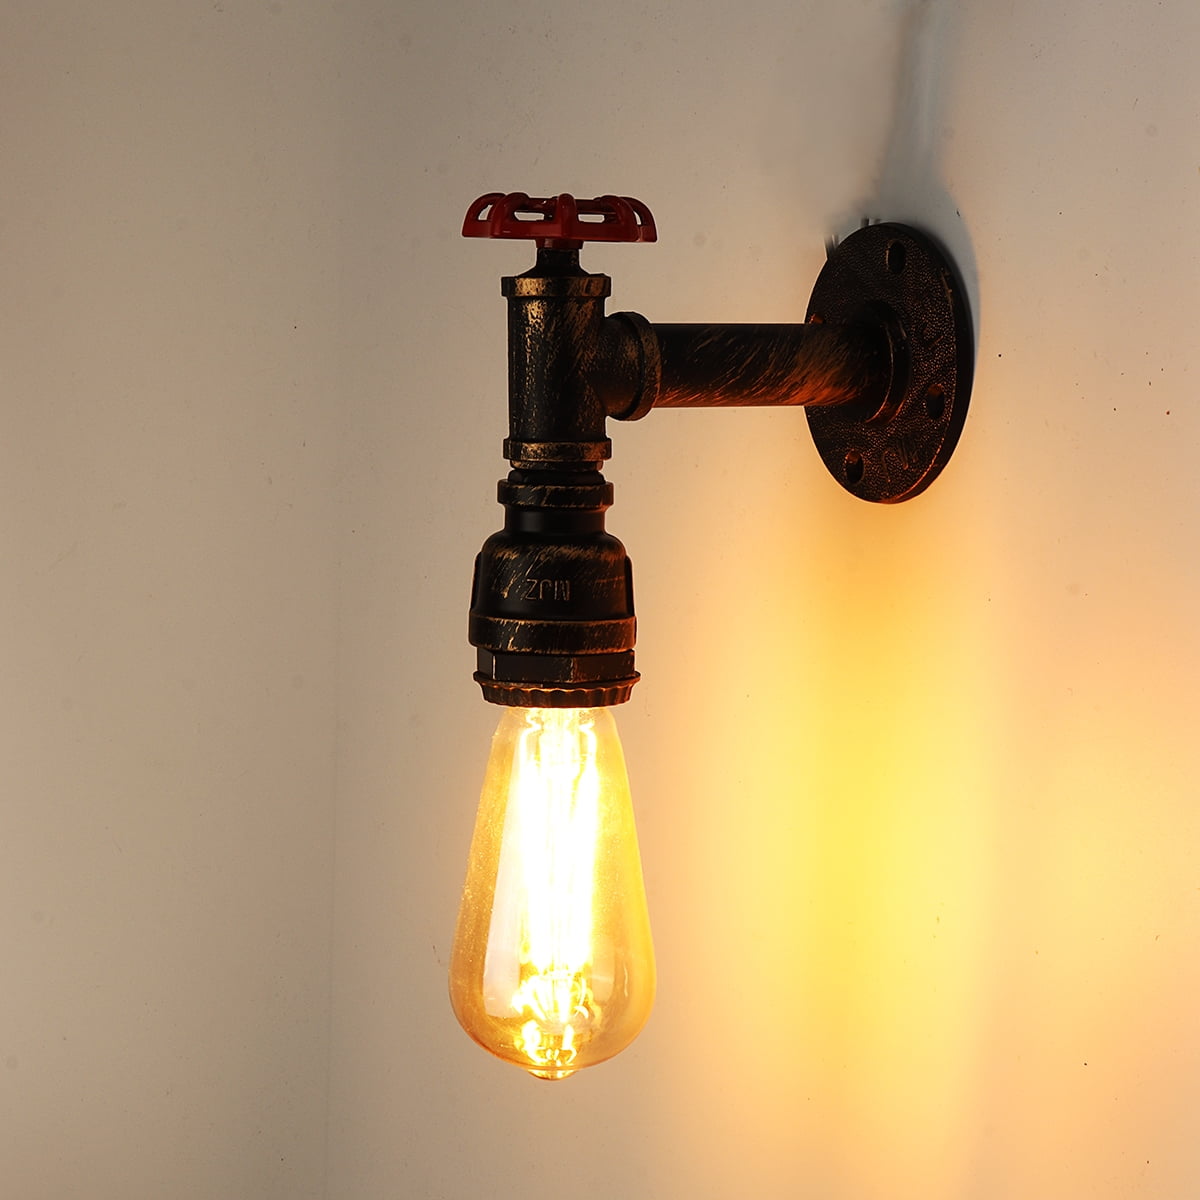 Vintage Industrial Steampunk Pipe Wall Sconce Light Wall Mount Loft Lamp Fixture 